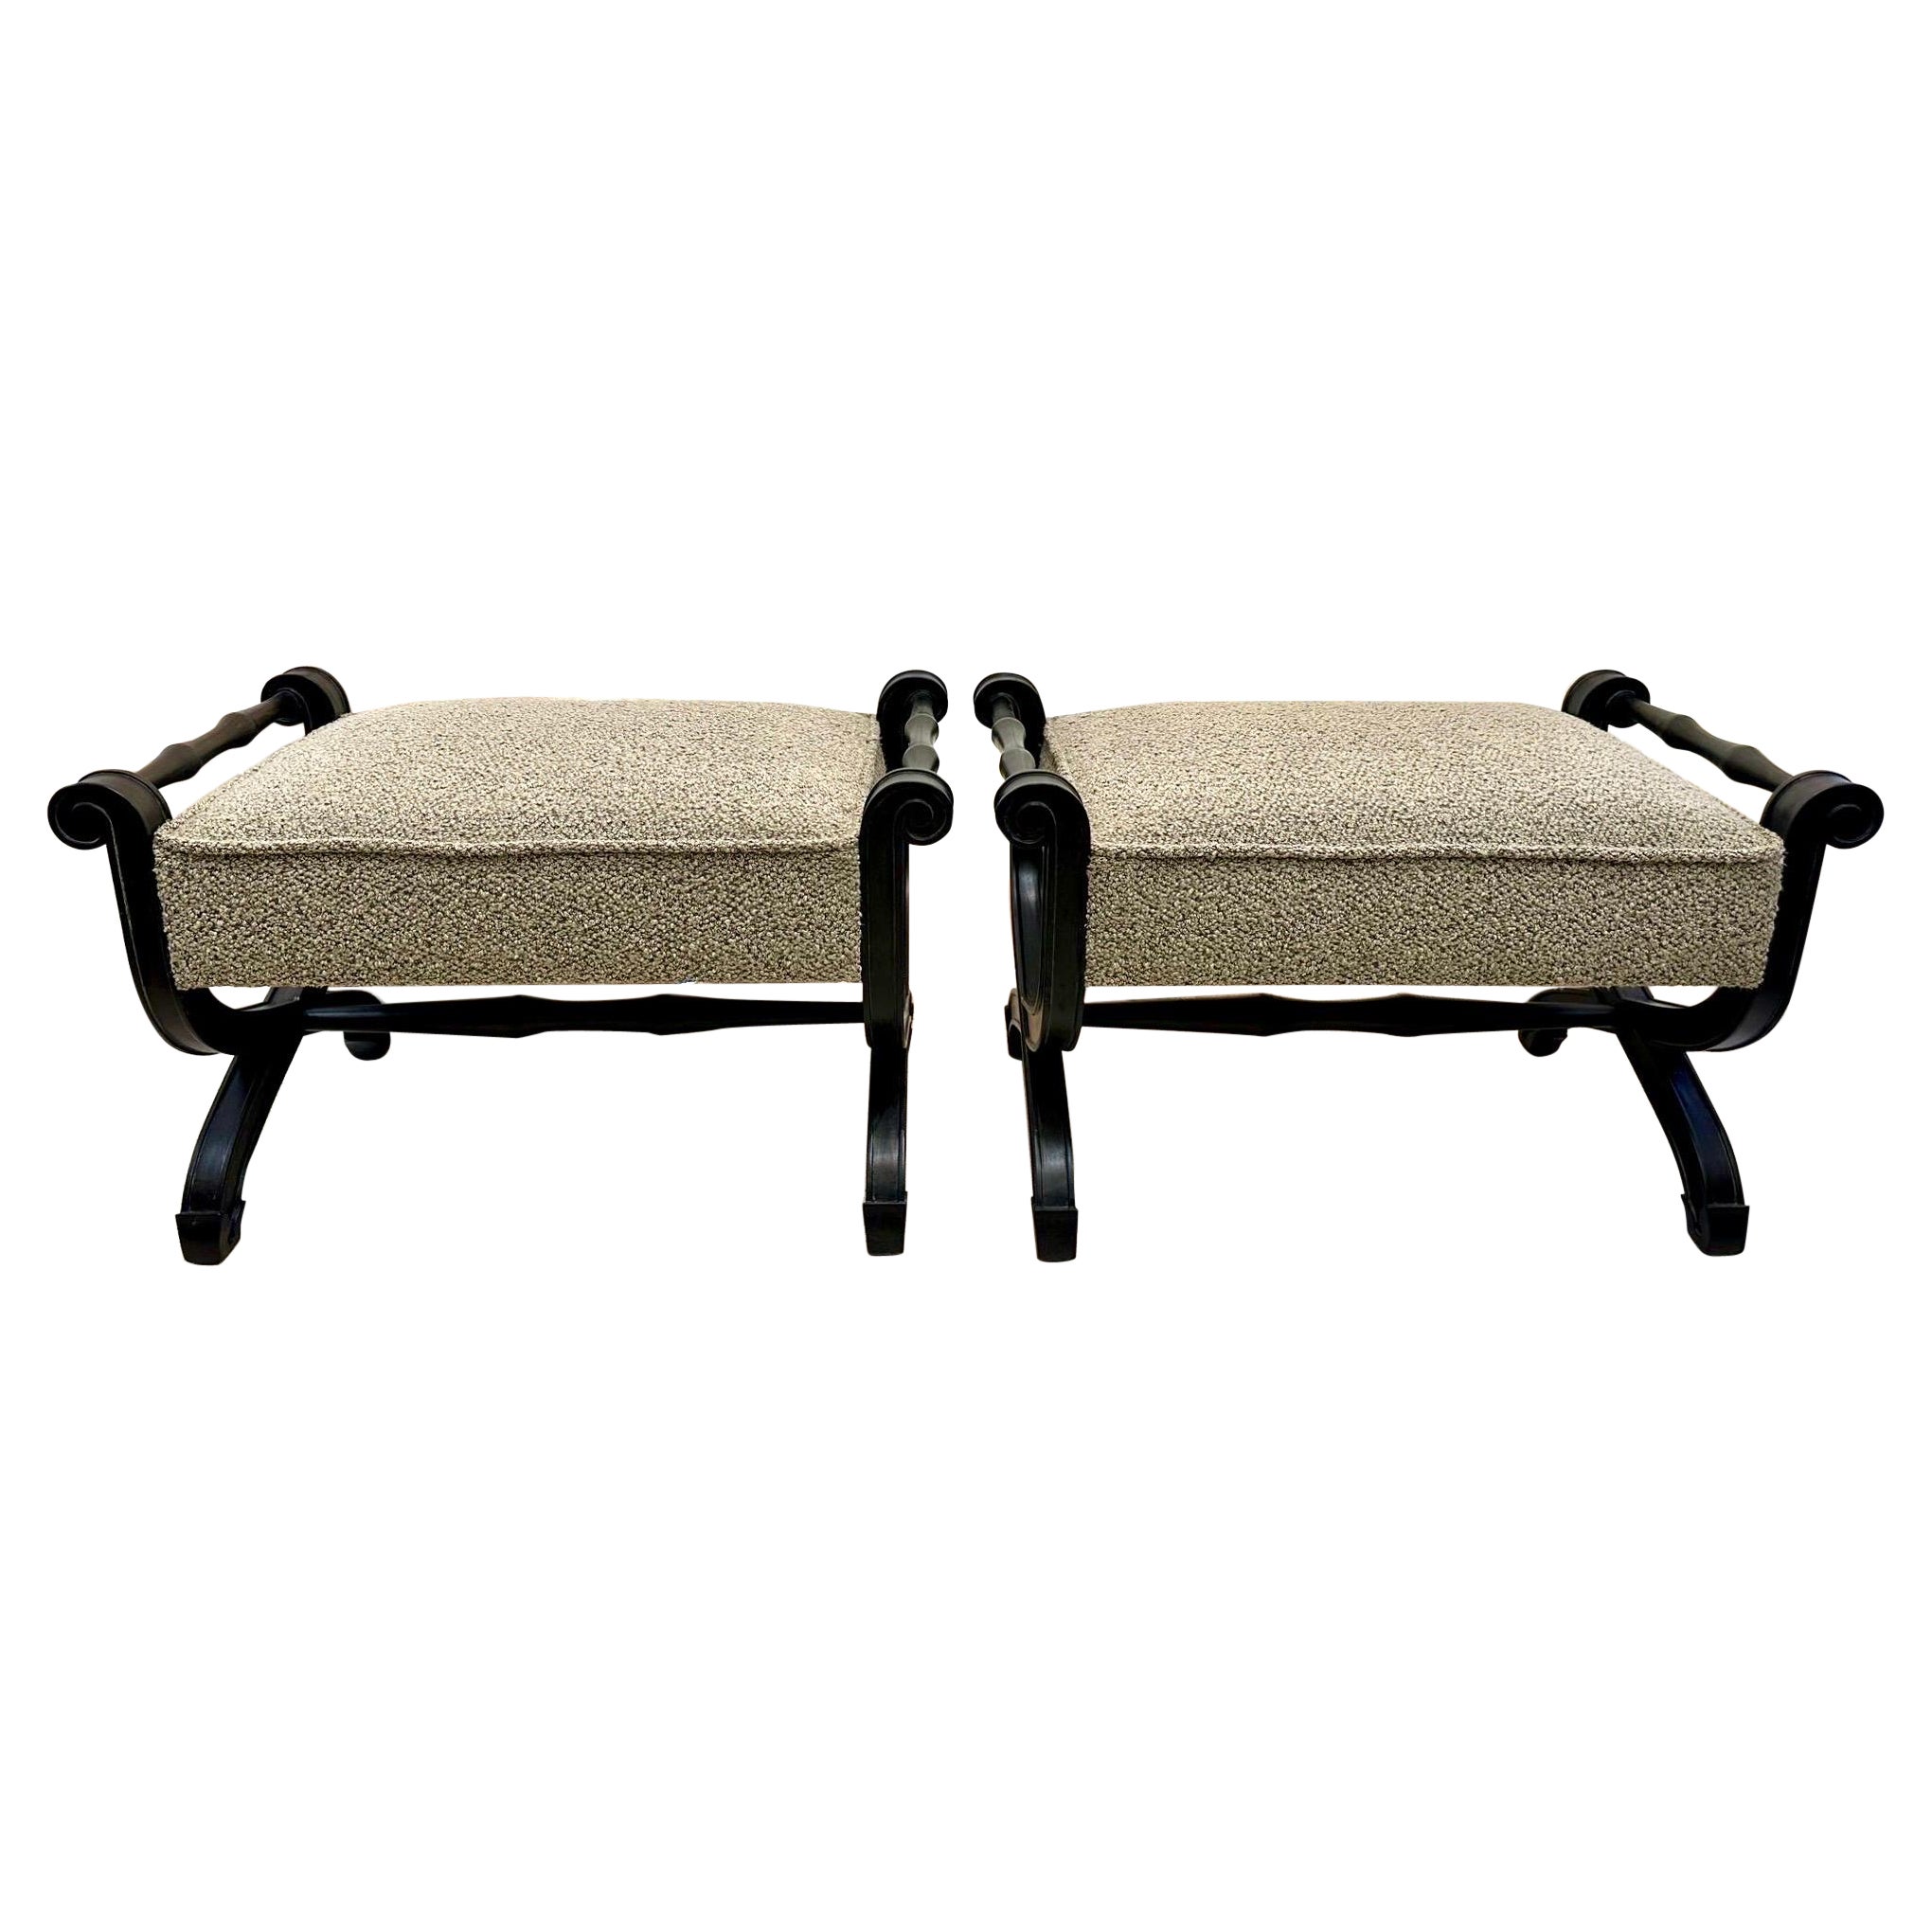 1950's Scrolled Carved Ebonized Wood Frame Benches/ Ottomans, Pair For Sale